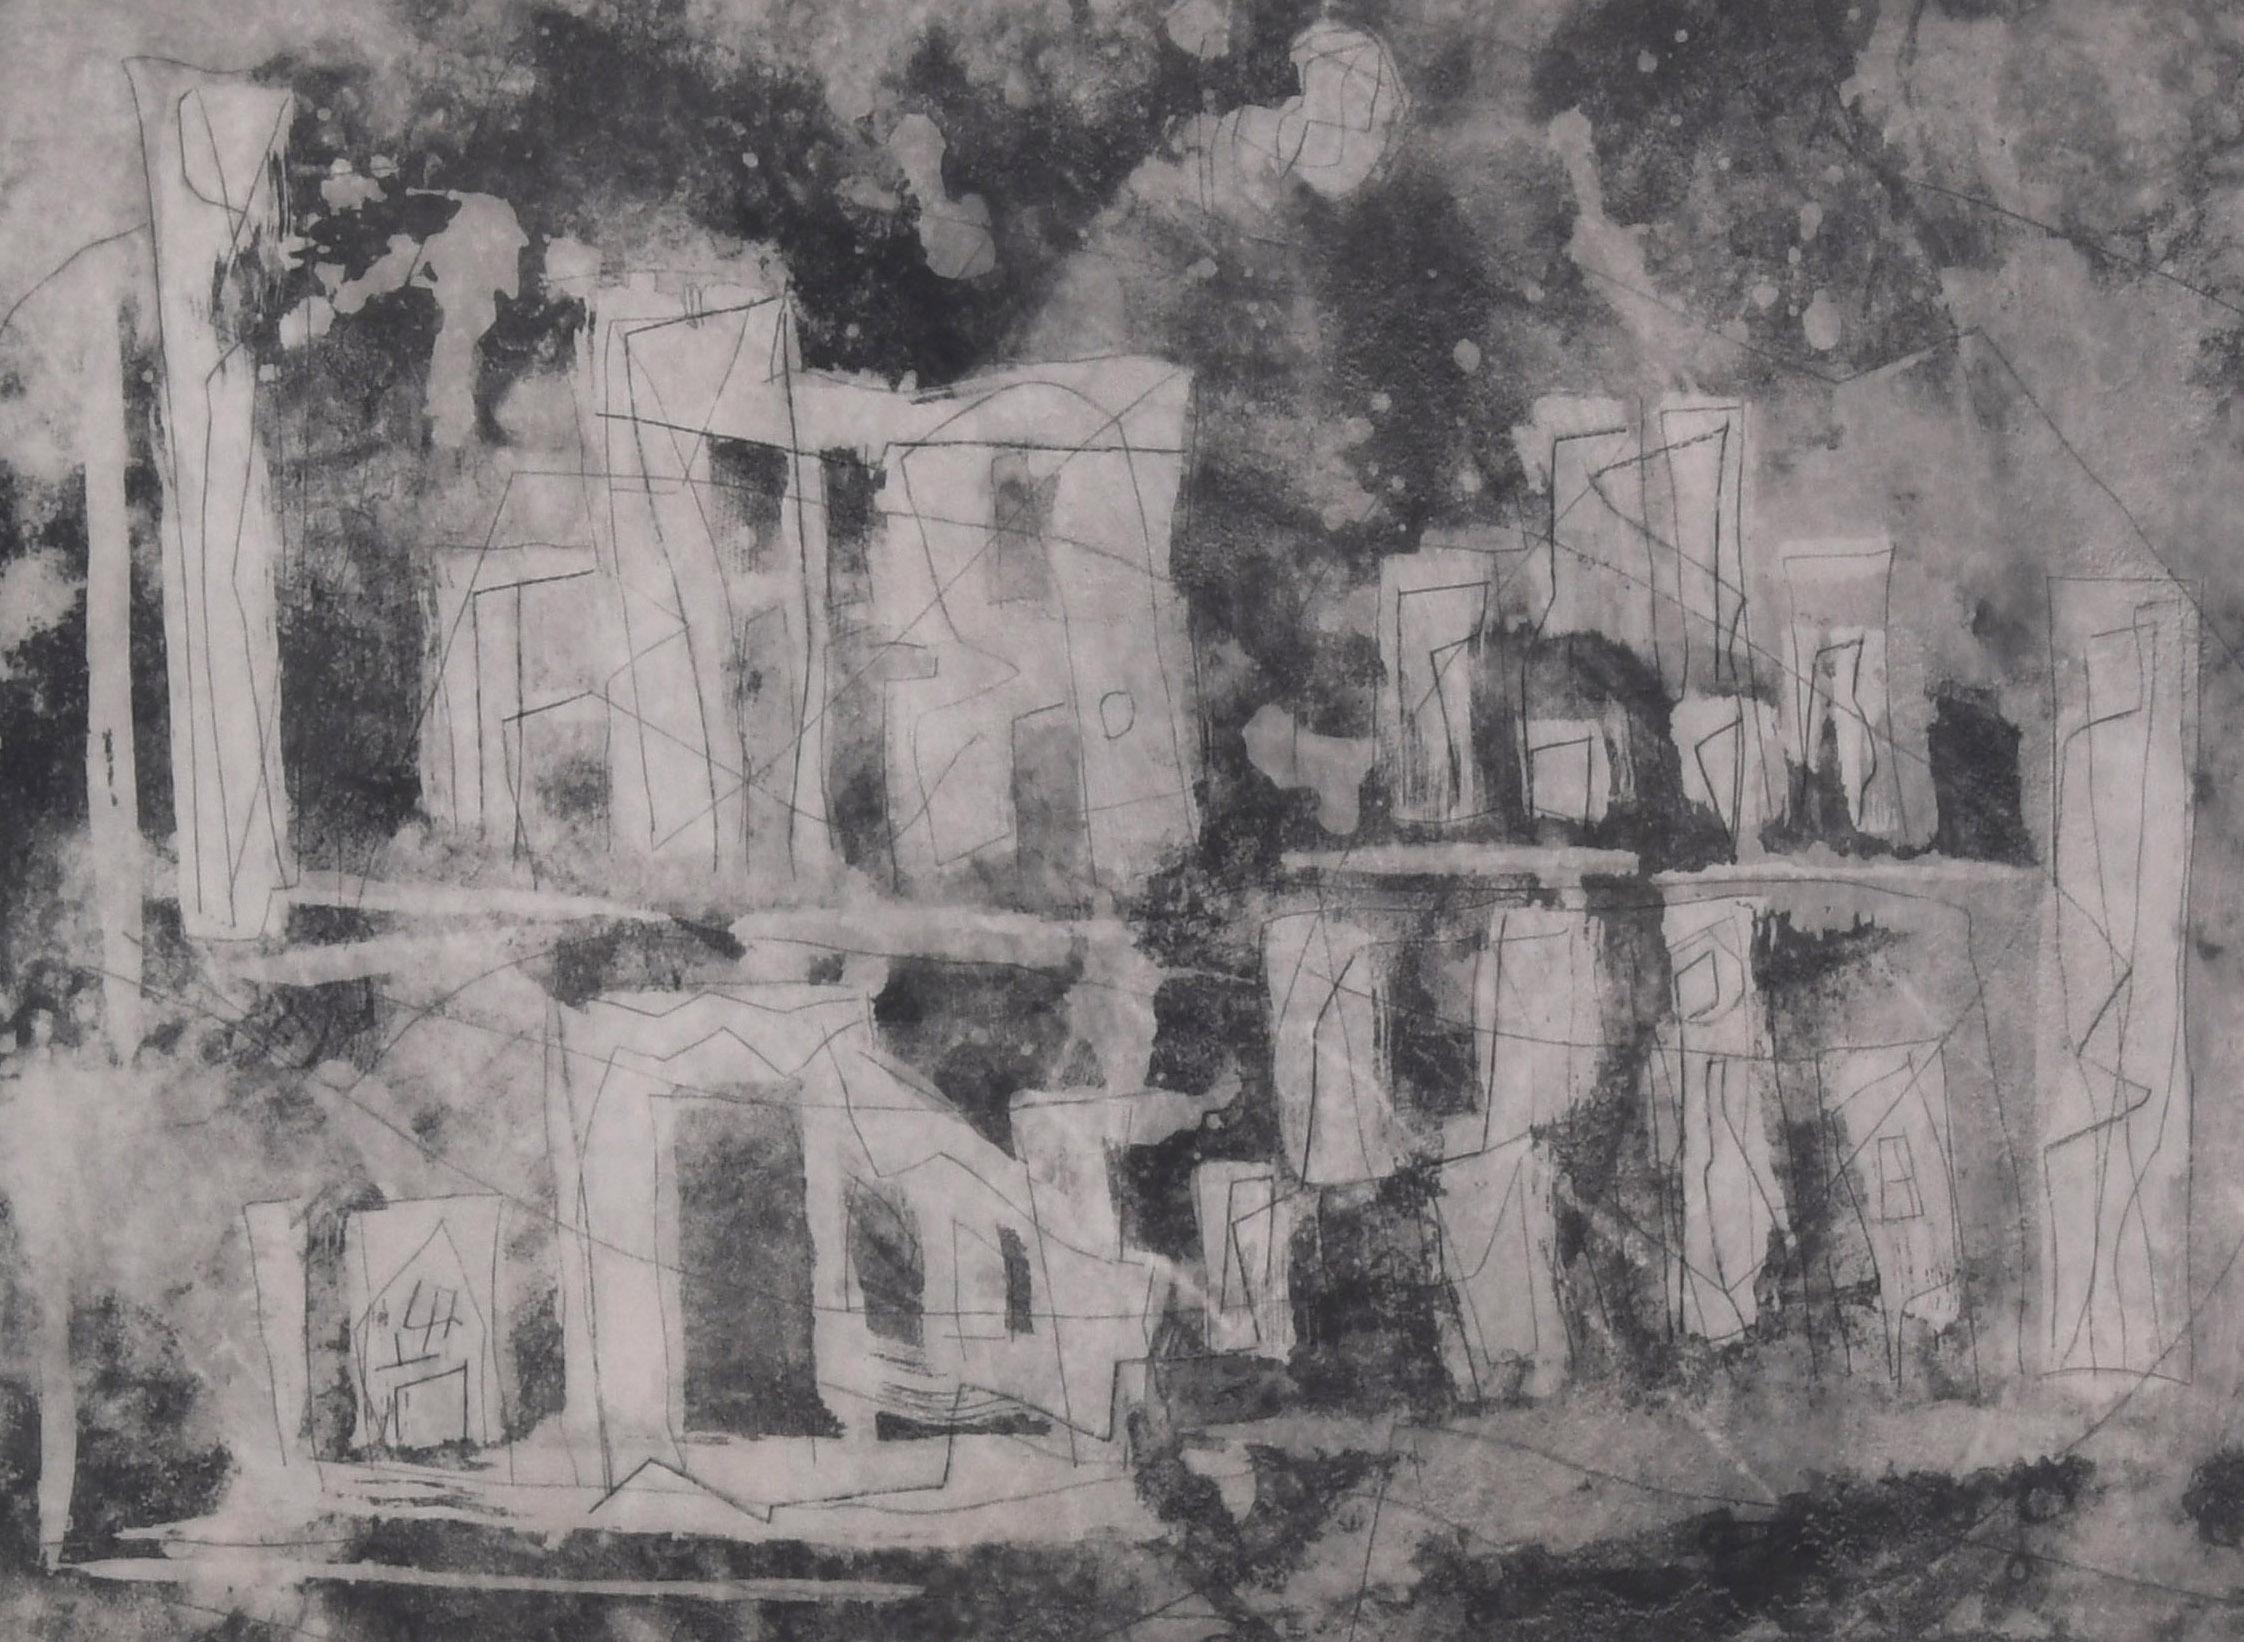 Ancient Landscape II (Ancient City)
Etching and drypoint, 1953-1955
Signed and titled in pencil by the artist;  (see photo)
Annotated: 